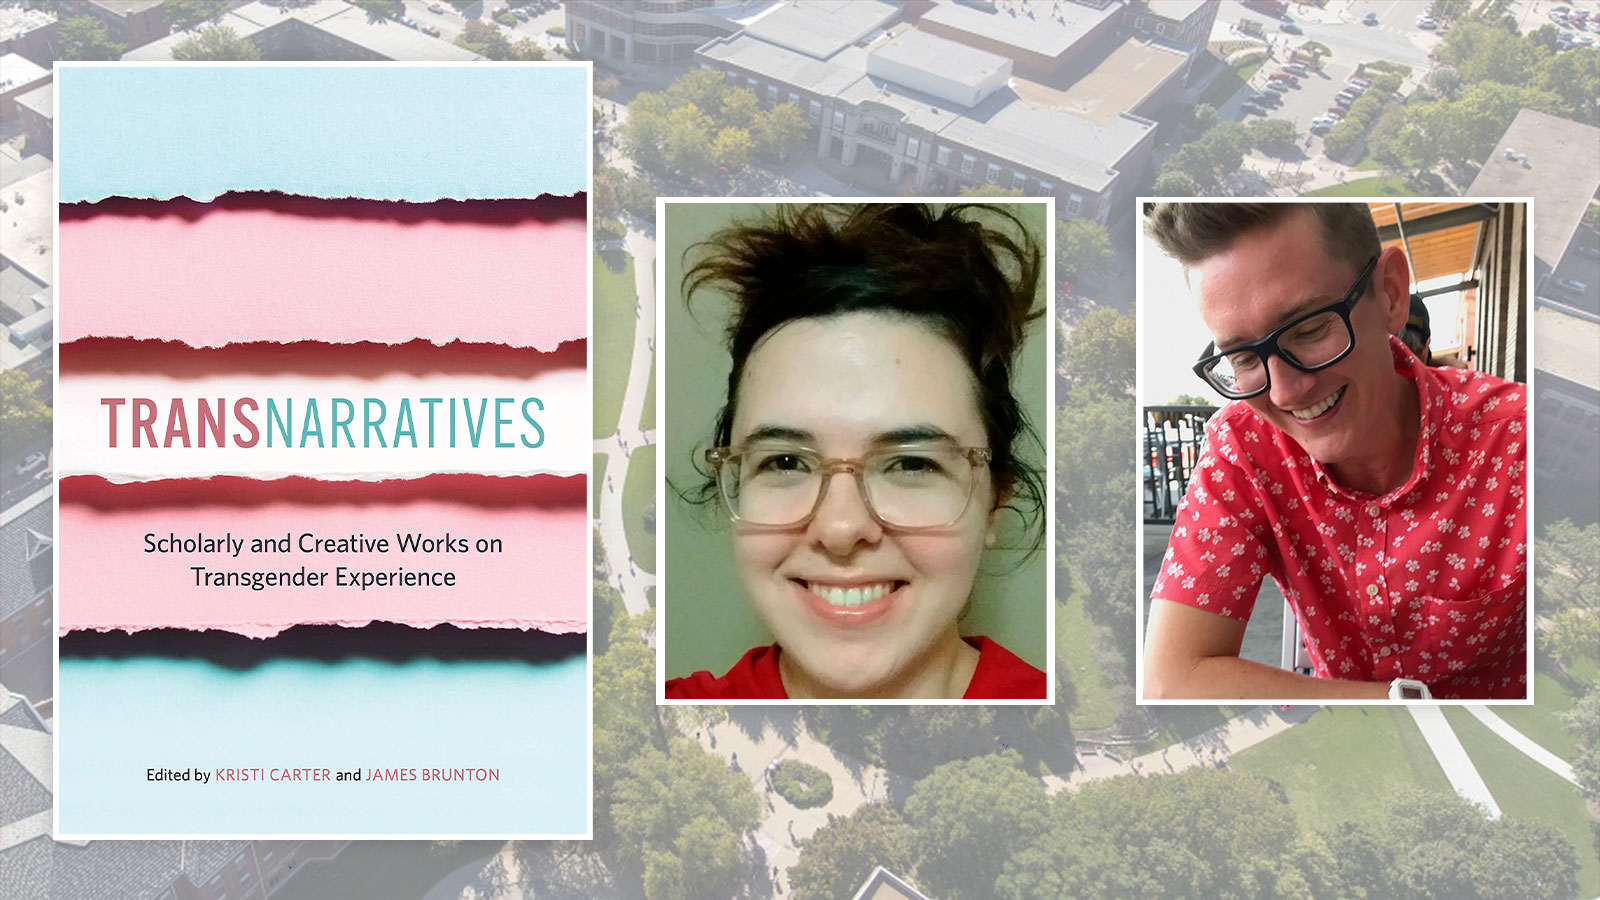 Kristi Carter, James Brunton, and the cover of TransNarratives